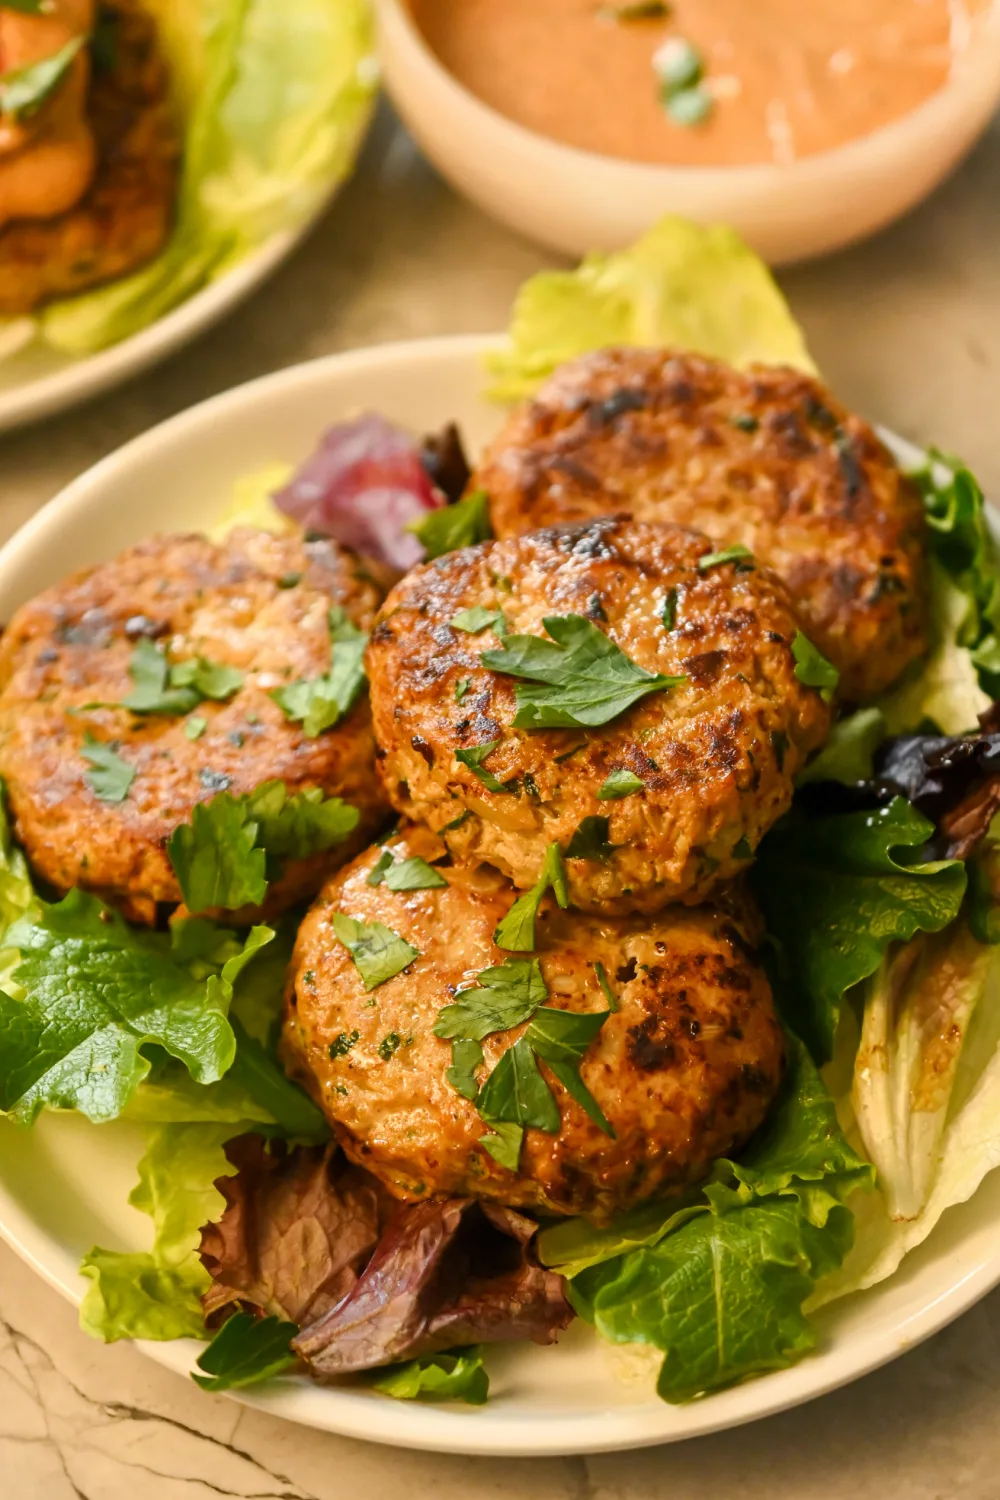 keto ground chicken burgers stacked on a bed of greens.jpg